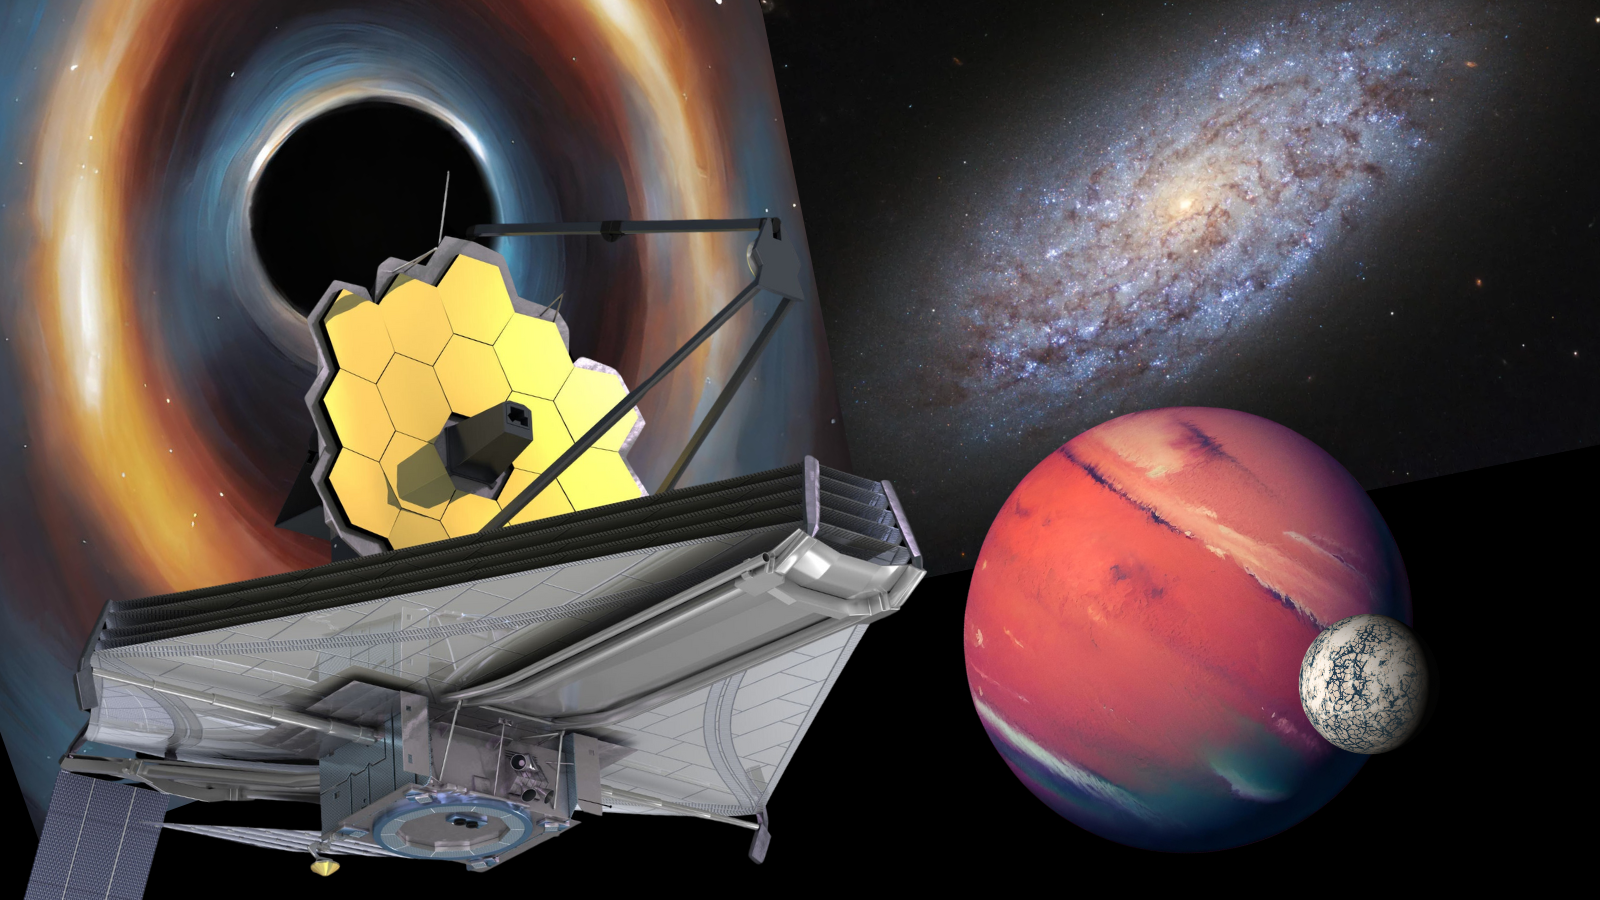 The James Webb Space Telescope’s targets over the next year include black holes, exomoons, dark energy — and more Space